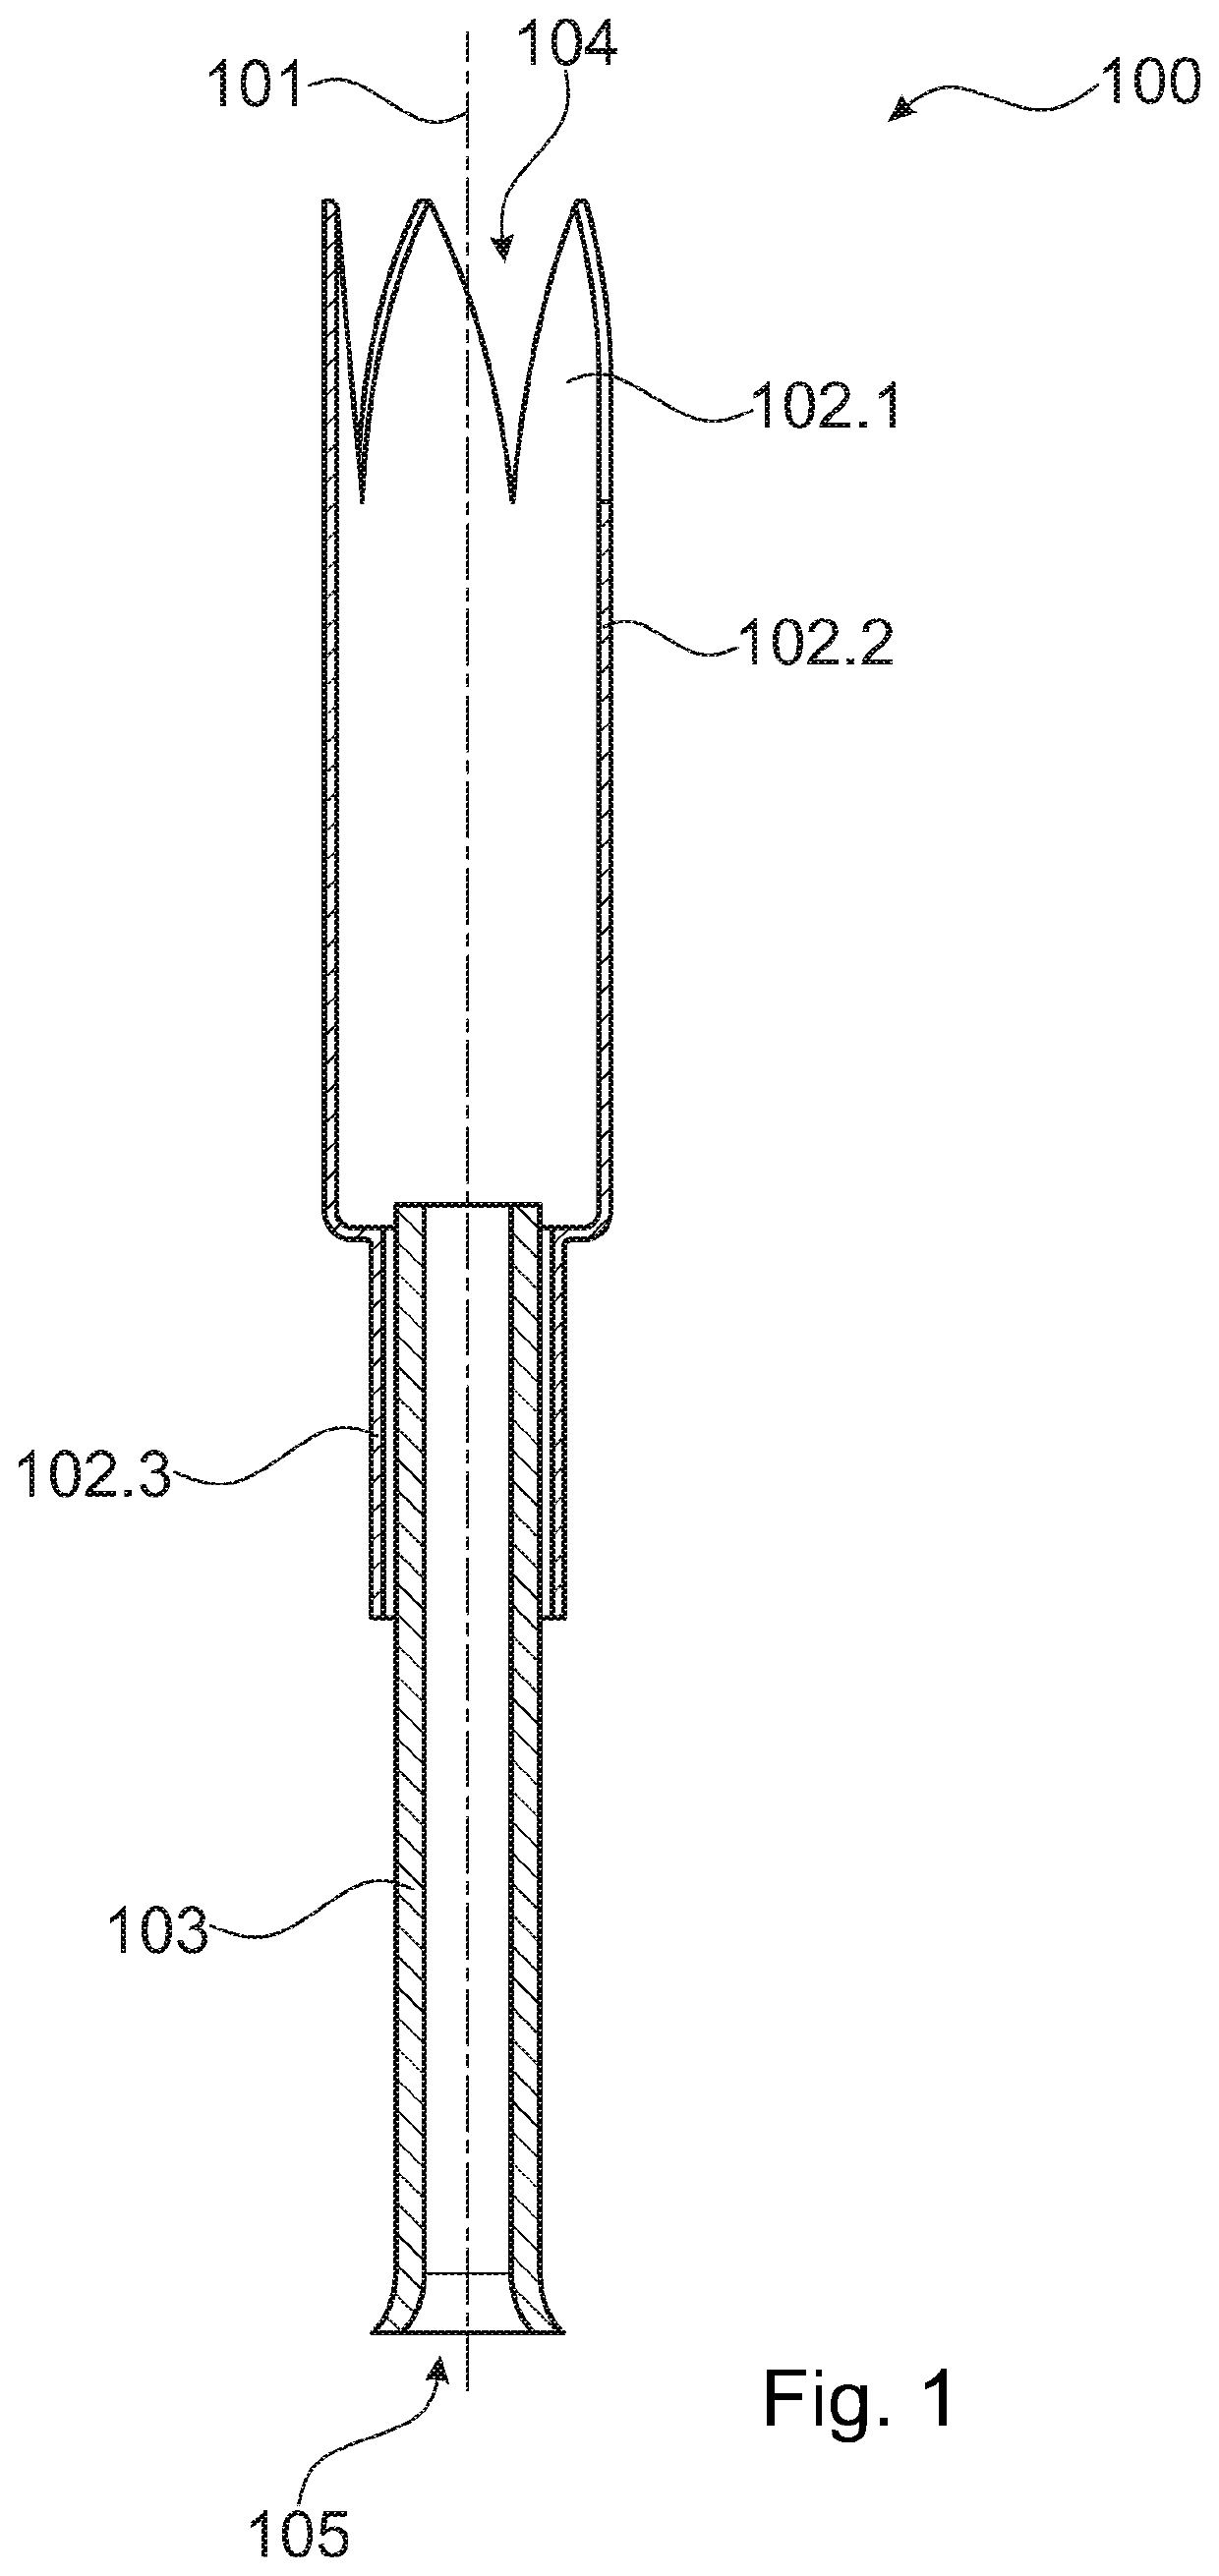 Conveying apparatus and method of conveying tampon applicators